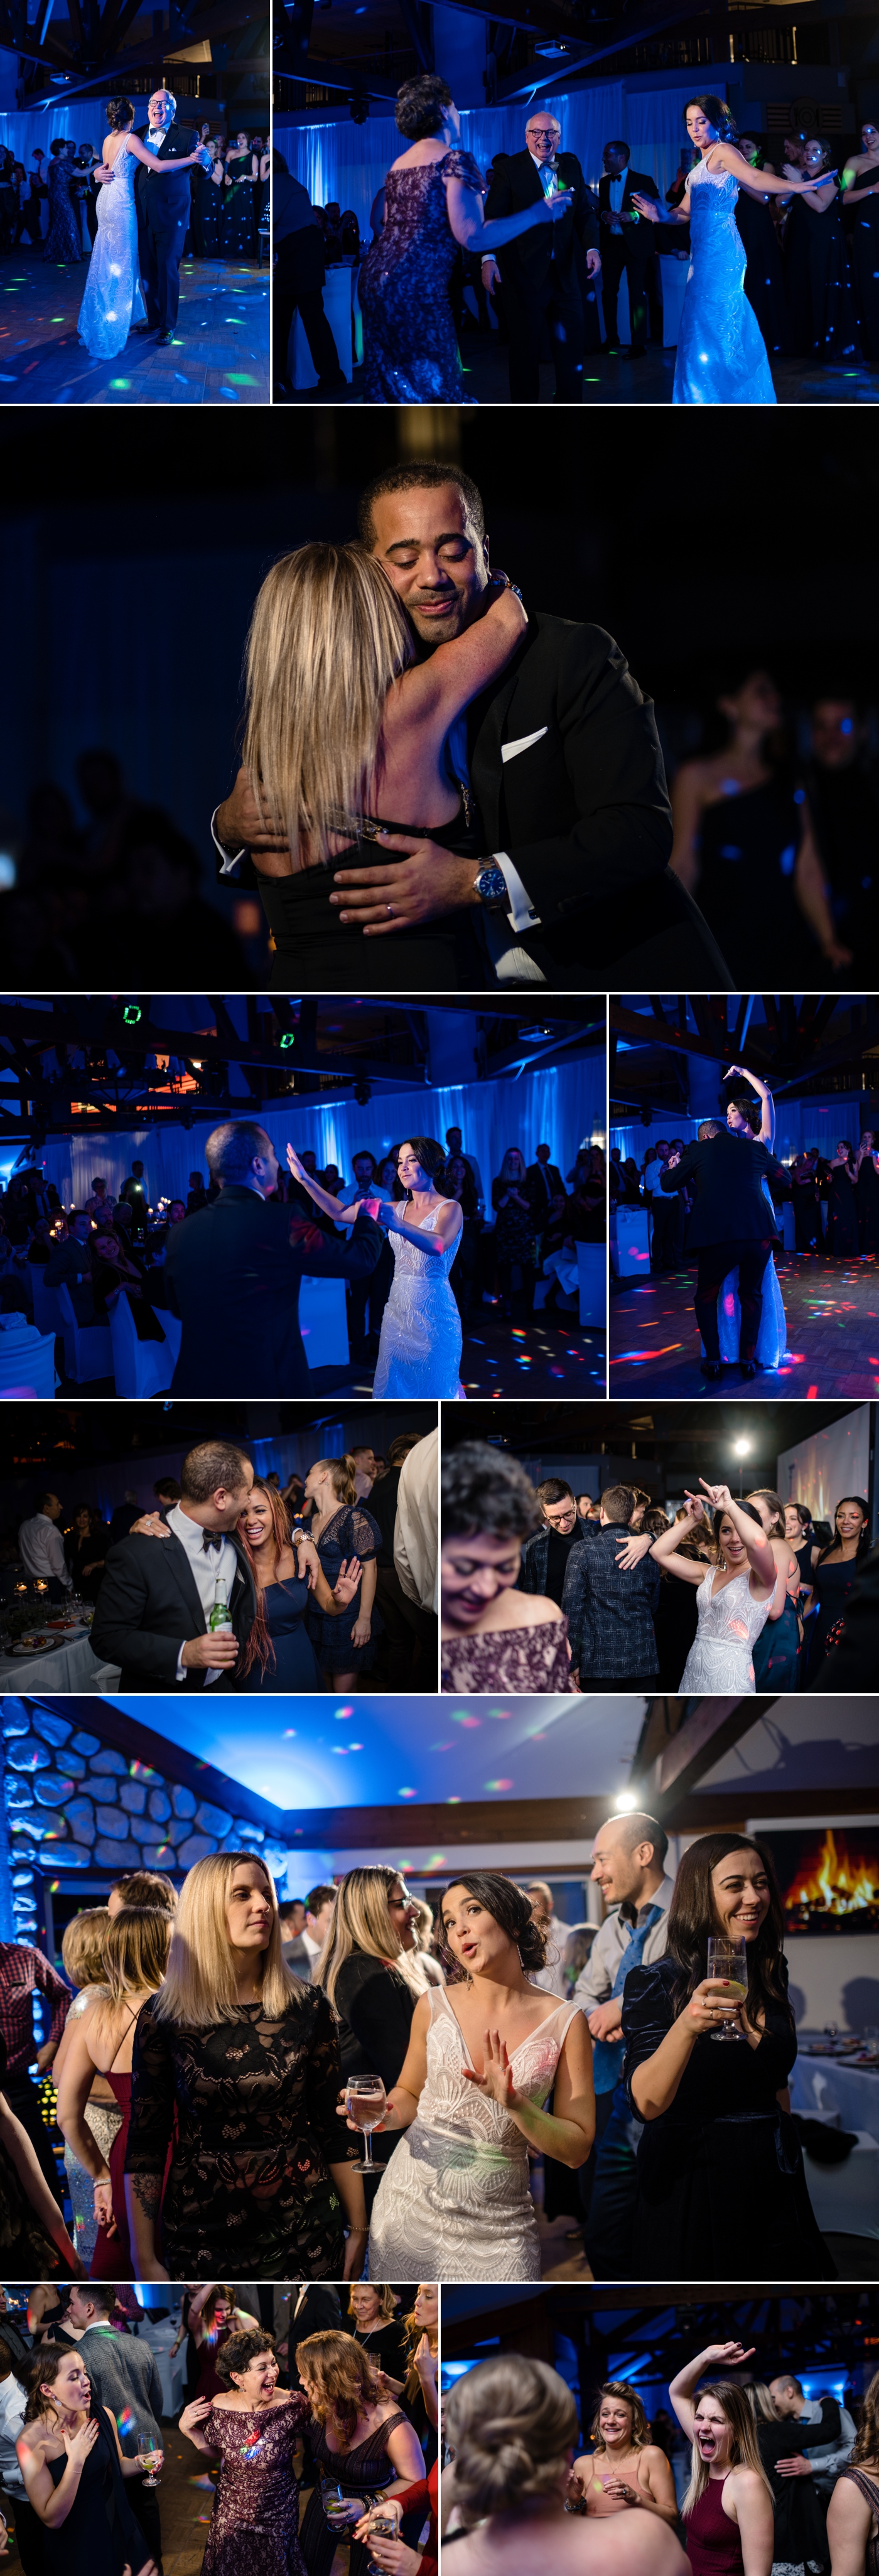 candid dance floor moments during a winter wedding reception at the grand manitou in mont tremblant quebec